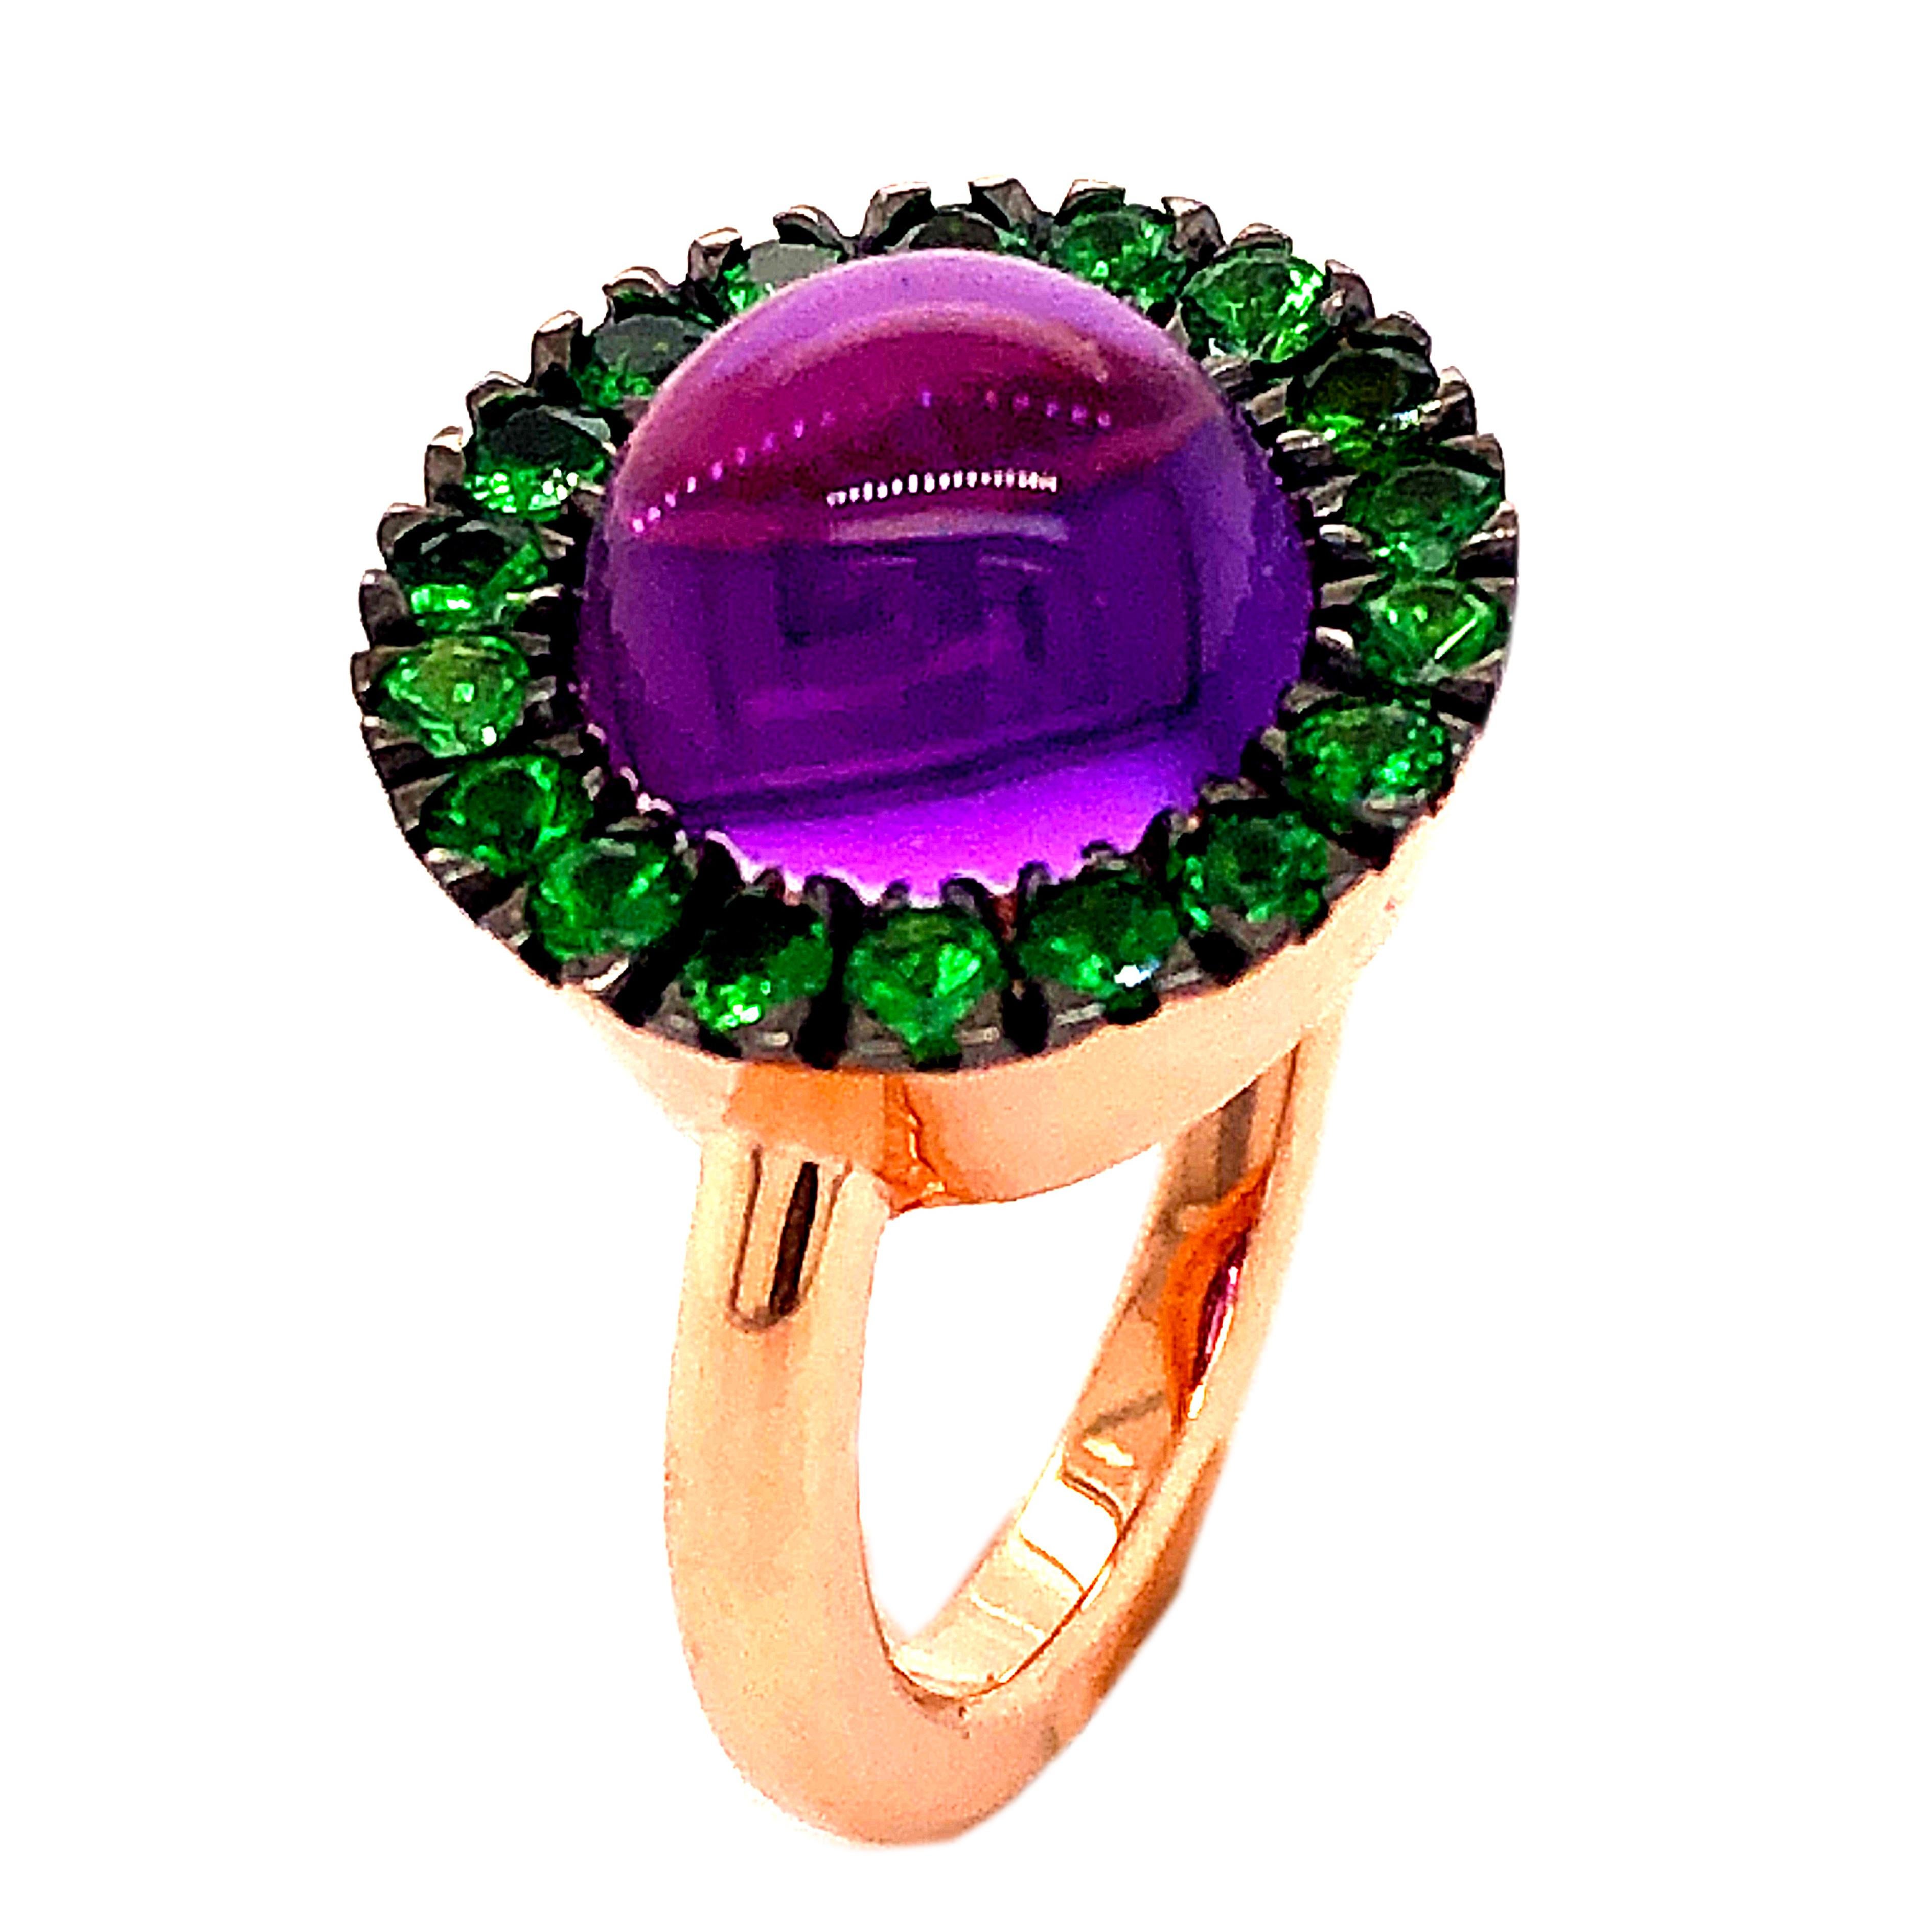 Chic, Unique yet Timeless Contemporary Cocktail Ring featuring a Natural 3.9Kt Amethyst Round Cabochon surrounded by 1.09Kt Natural Vivid green Tsavorite in an elegant Rose Gold Setting: a Stunning, Magical Piece.
In our smart Burgundy Leather Box